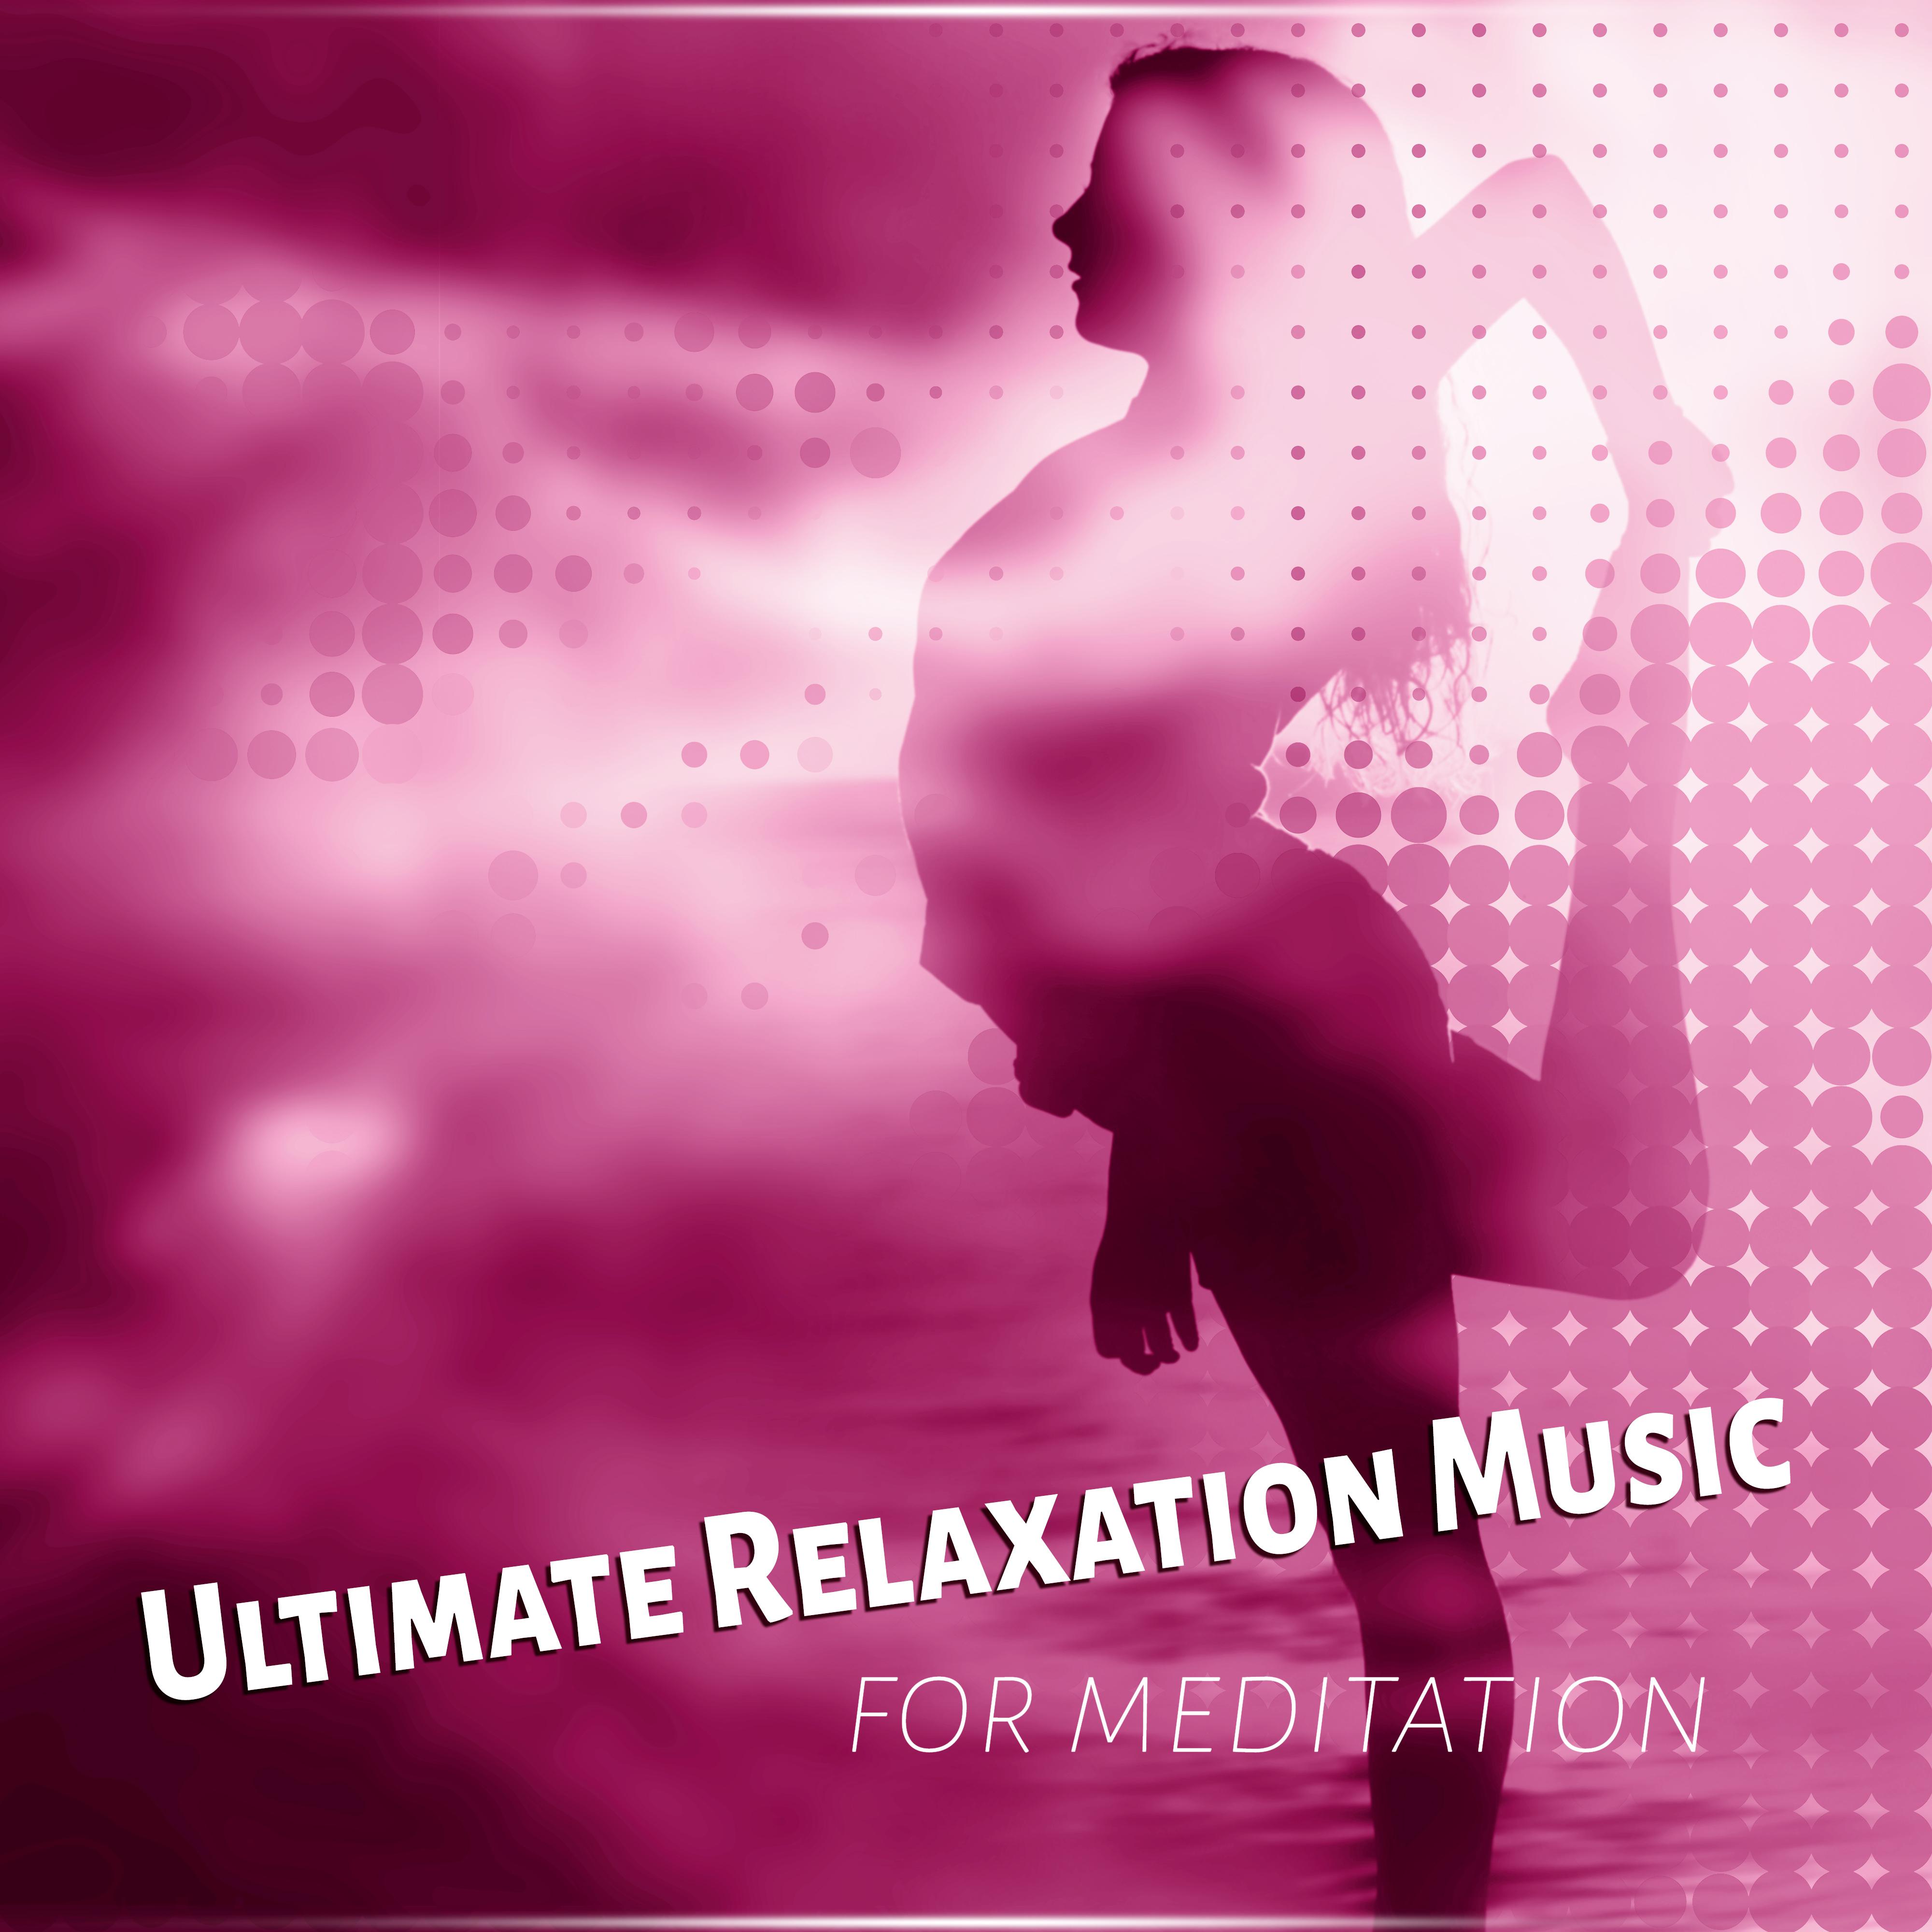 Ultimate Relaxation Music for Meditation - Best Relaxing Music, Therapy Sleep and Spa Dreams